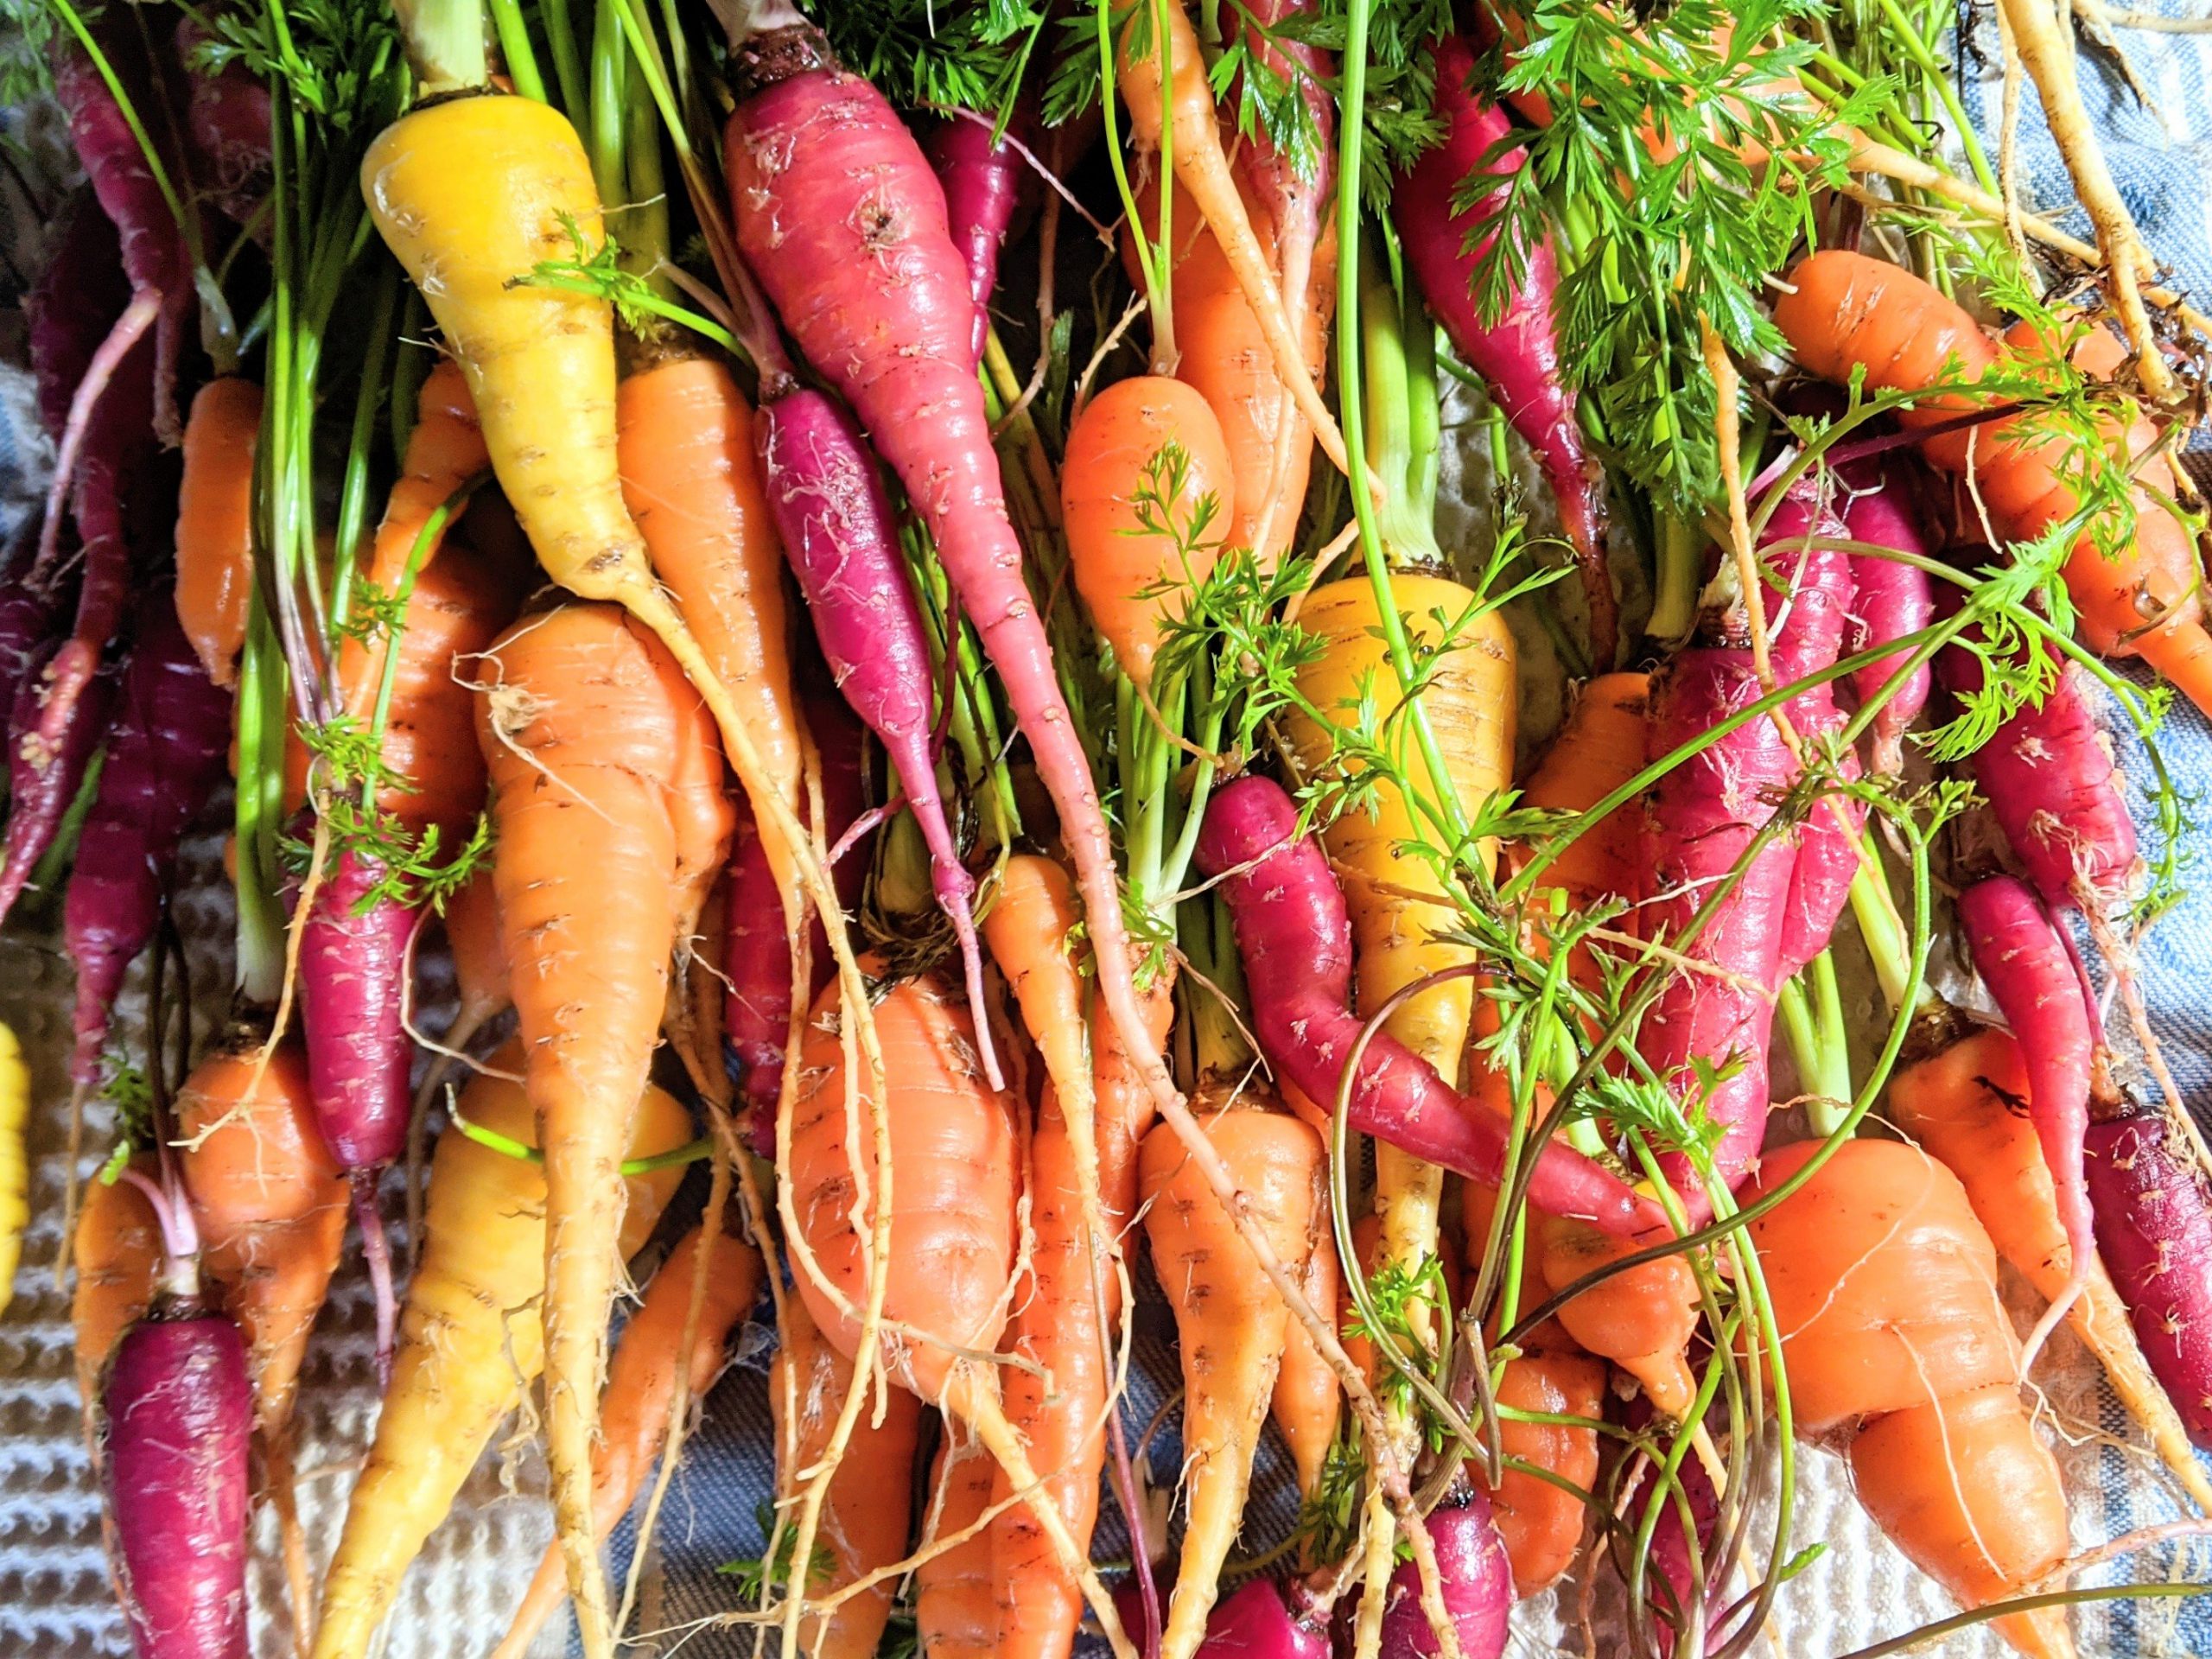 rainbow carrots grow in the garden yellow orange and purple carrots healthy homegrown carrot recipes from the garden vegetarian gluten free